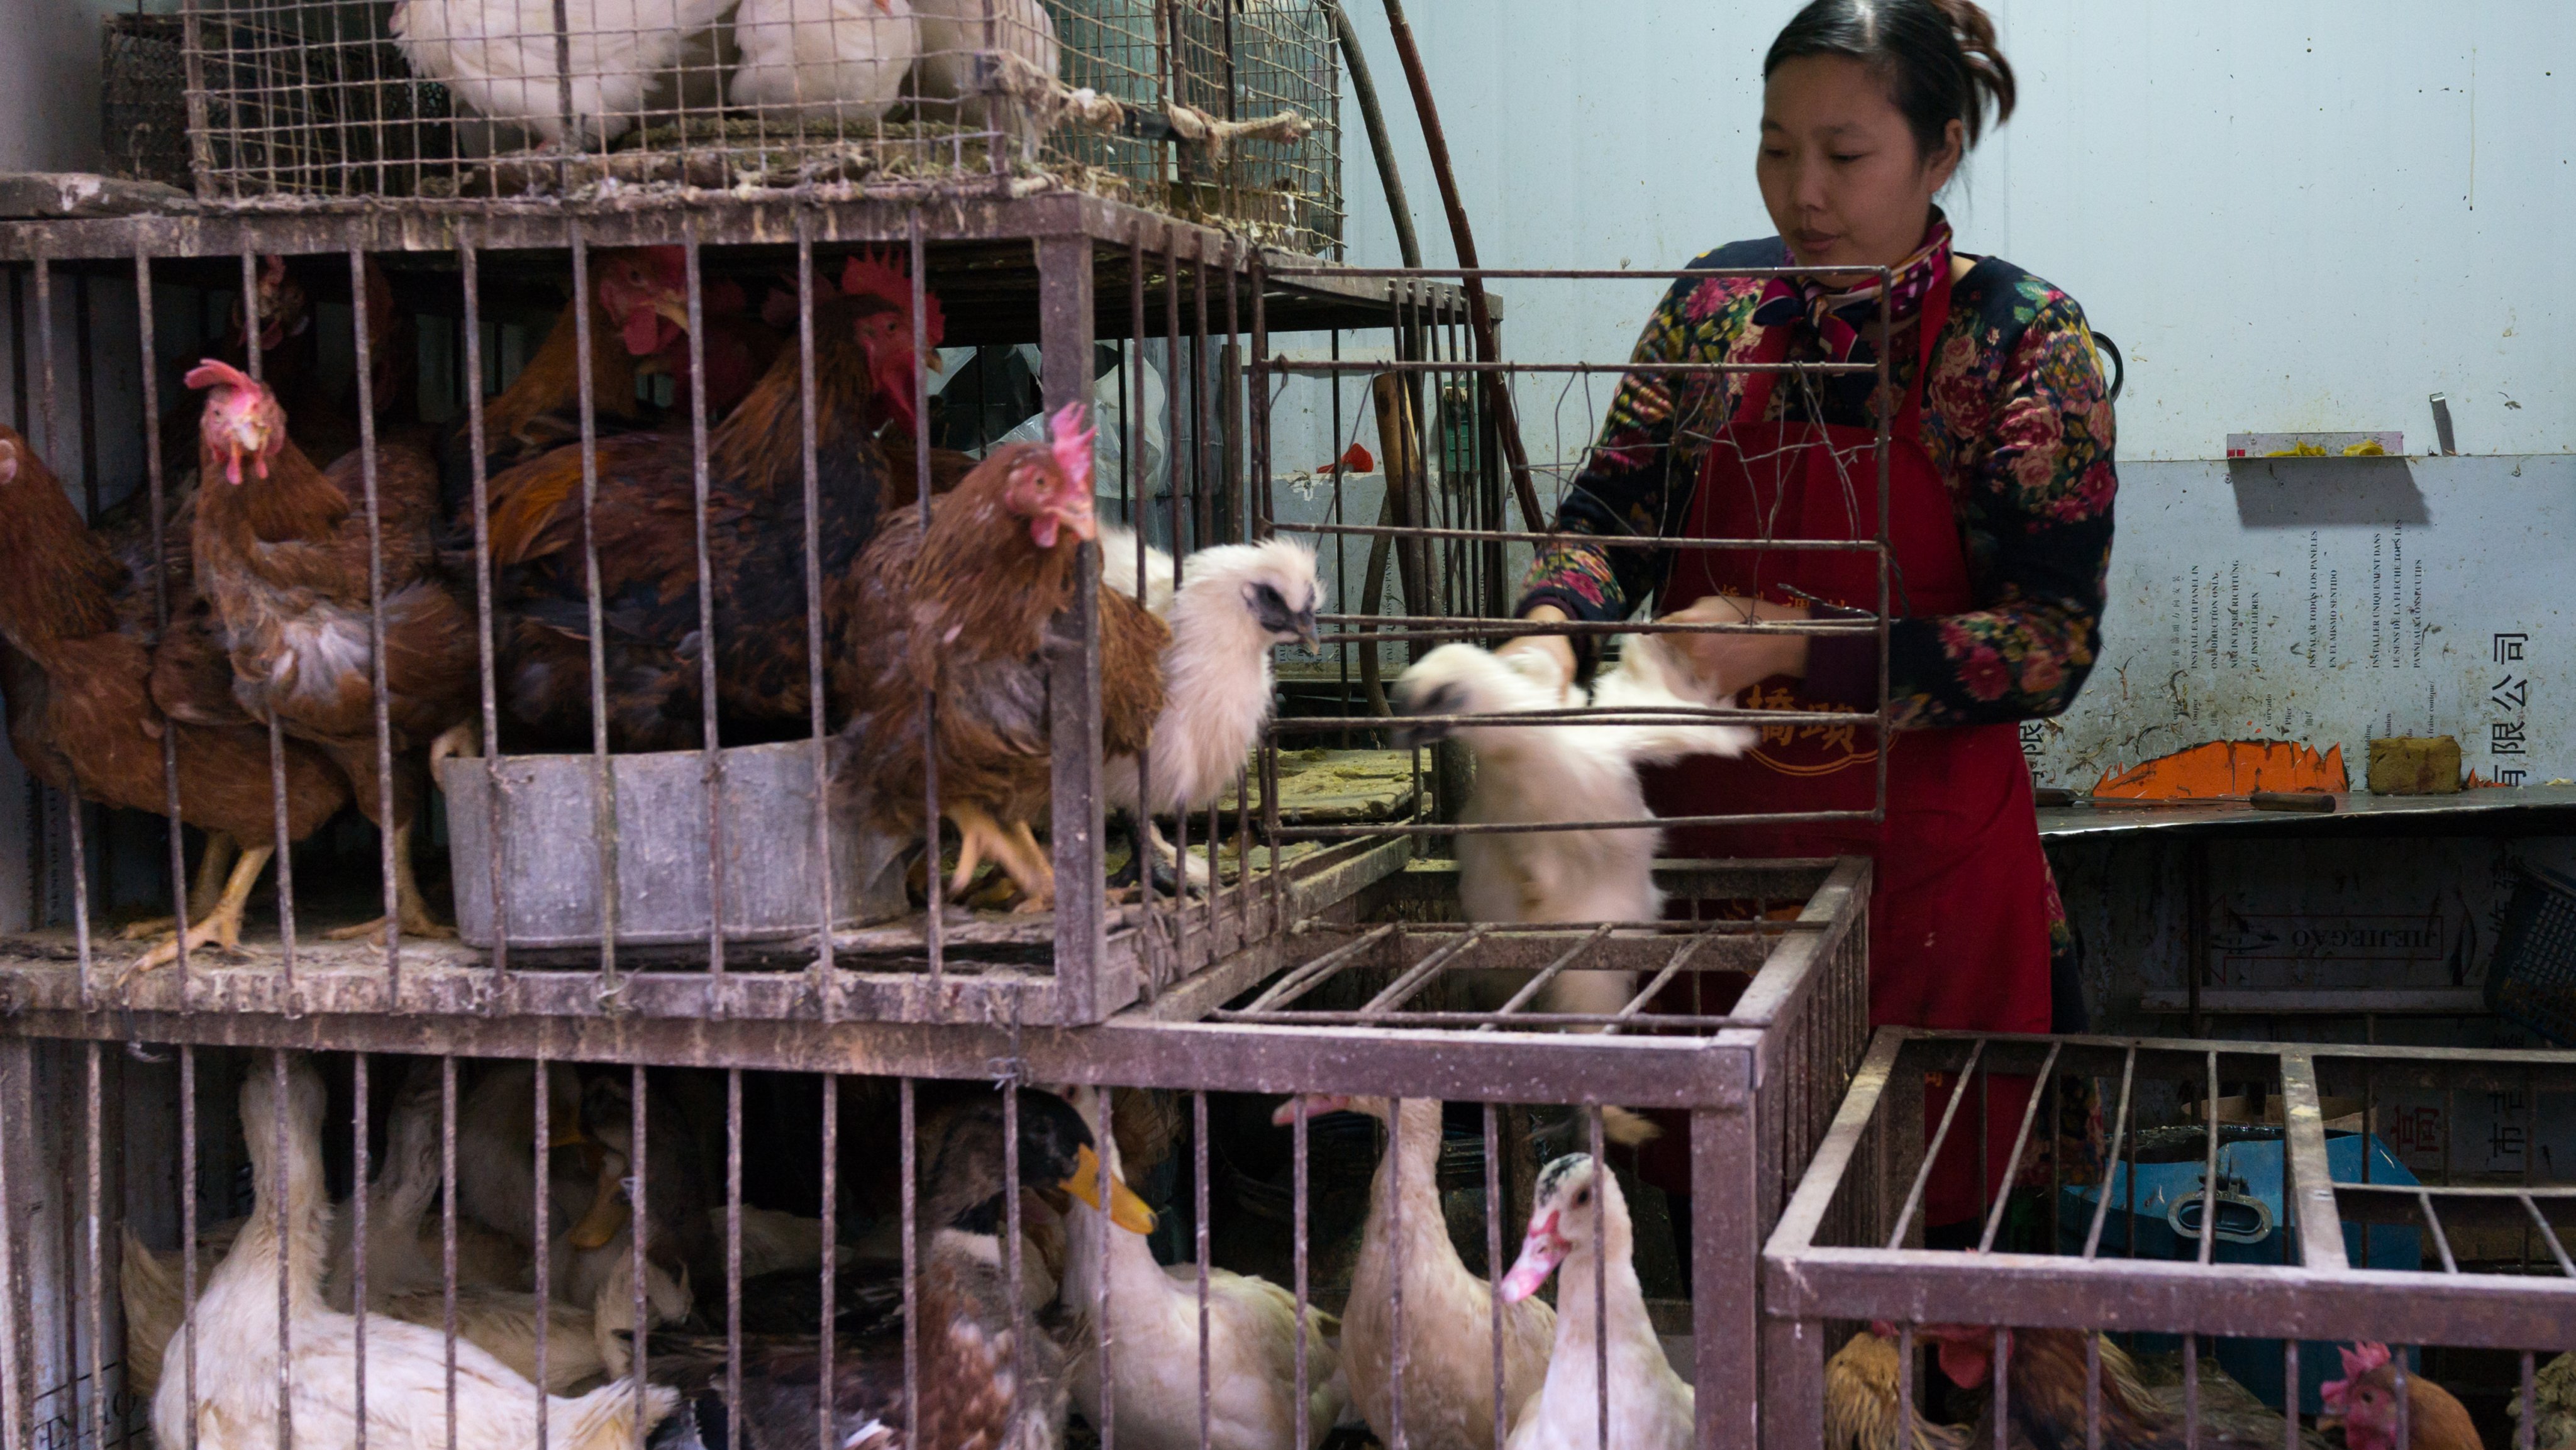 Woman selling live chickens and ducks in cages at a food market, Gansu province, Lanzhou, China